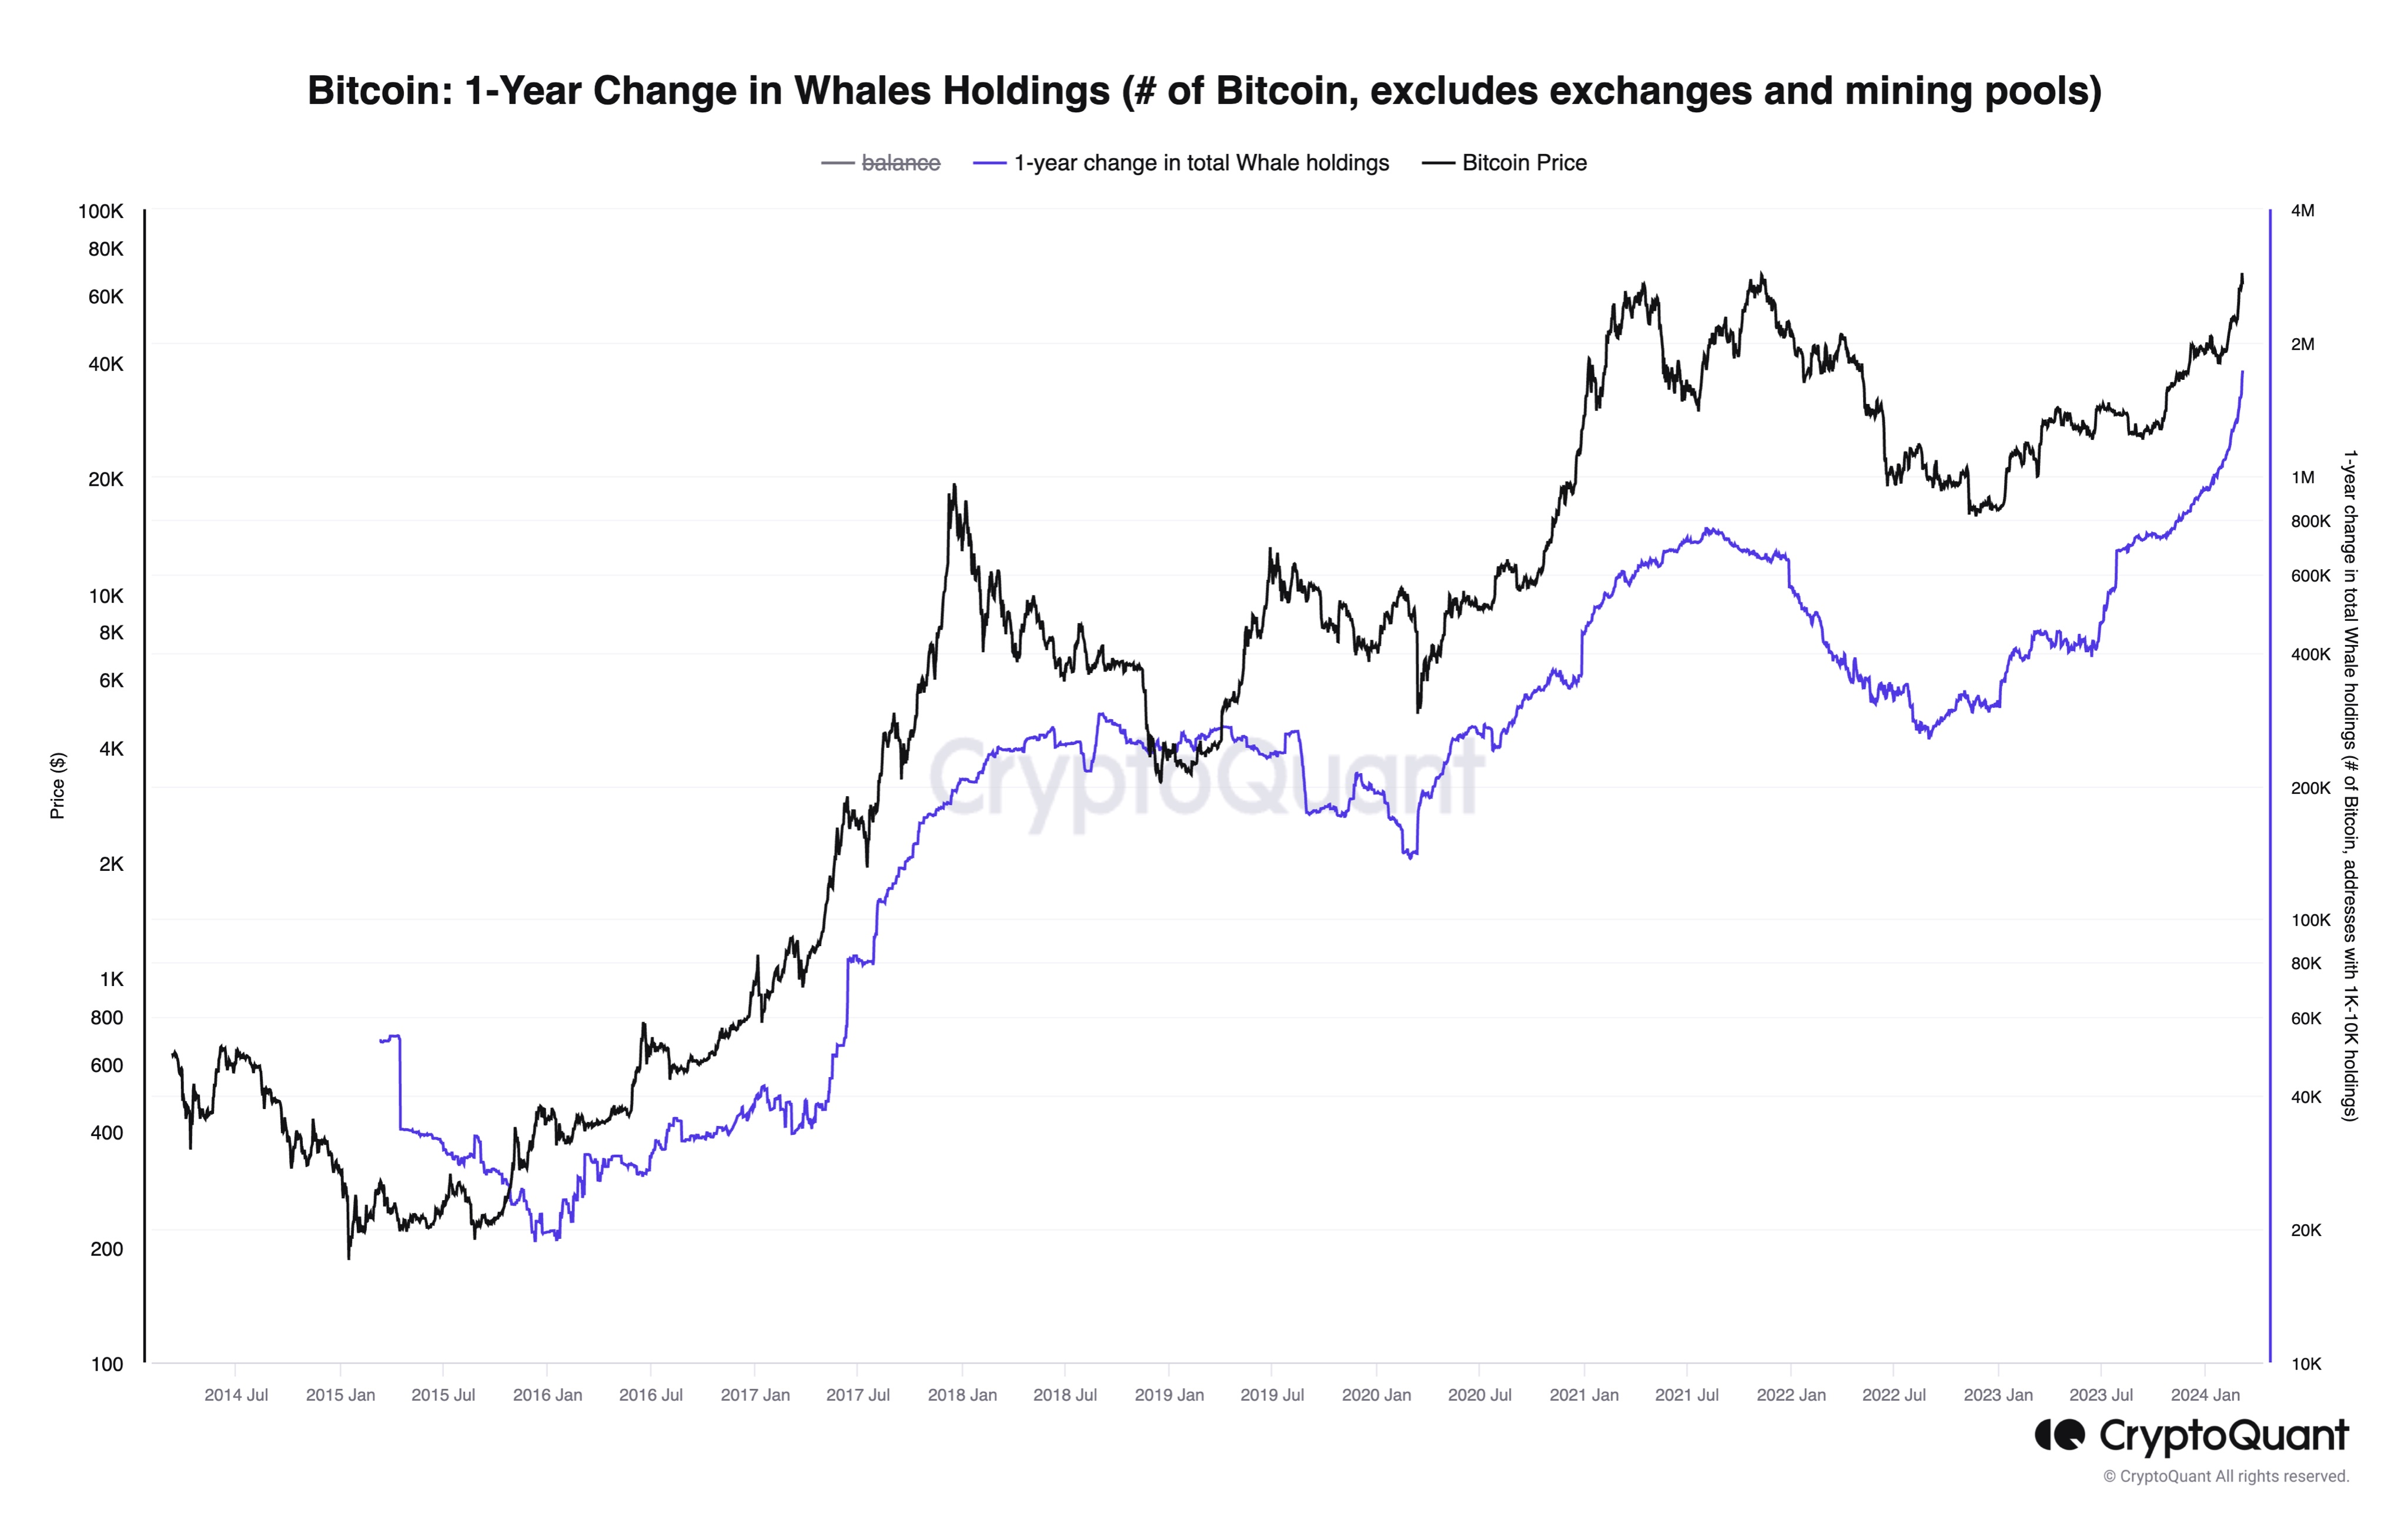 Bitcoin whales holding 1,000–10,000 BTC, 1-year change